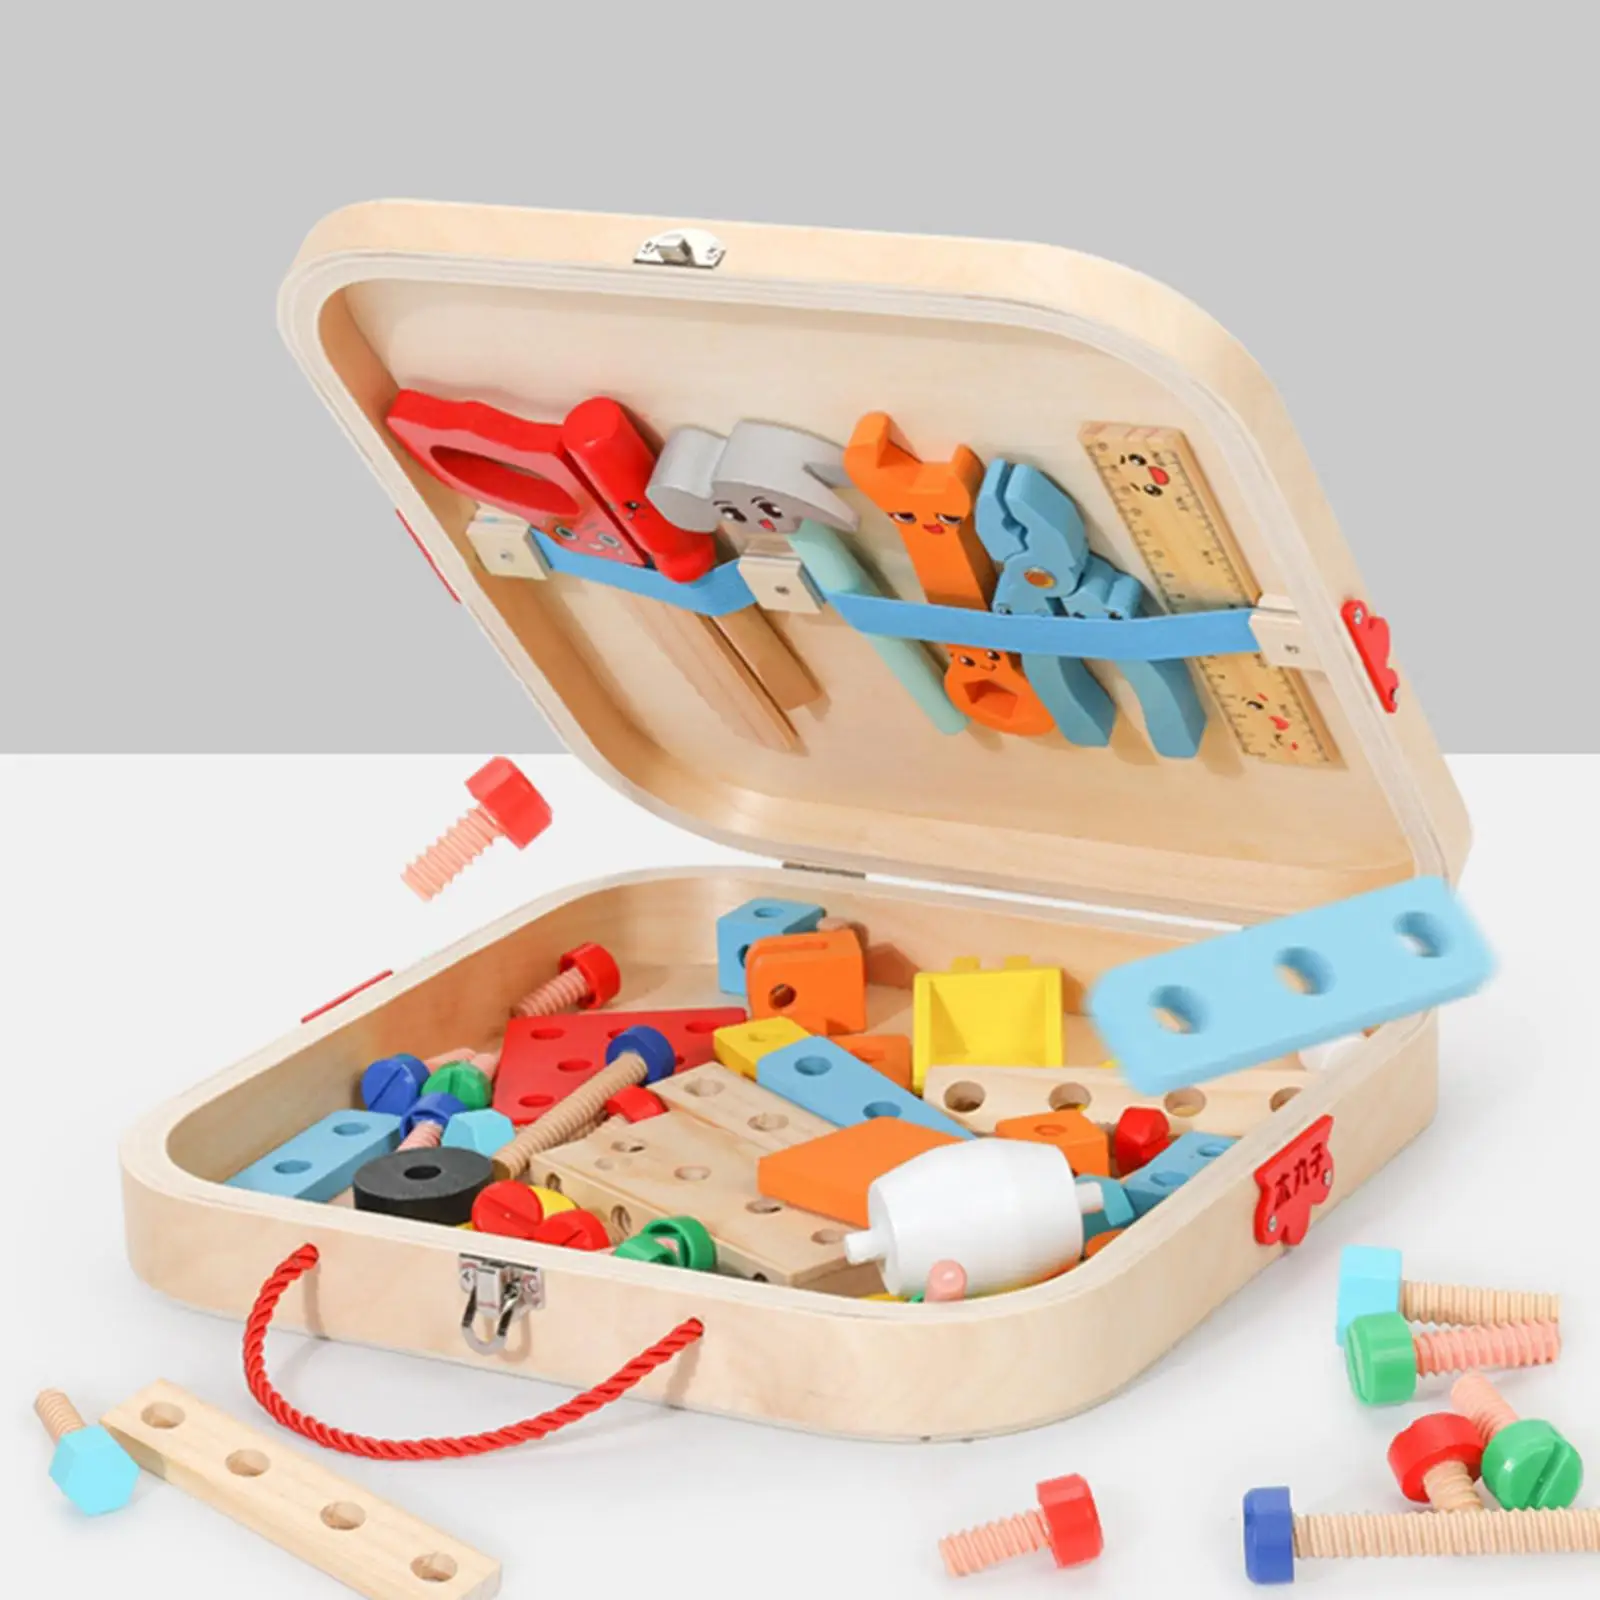 Kids Tool Set Pretend Toy Montessori Educational Gift Wooden Toddlers Tools Set Wooden Toy Tools Box for Bedrooml